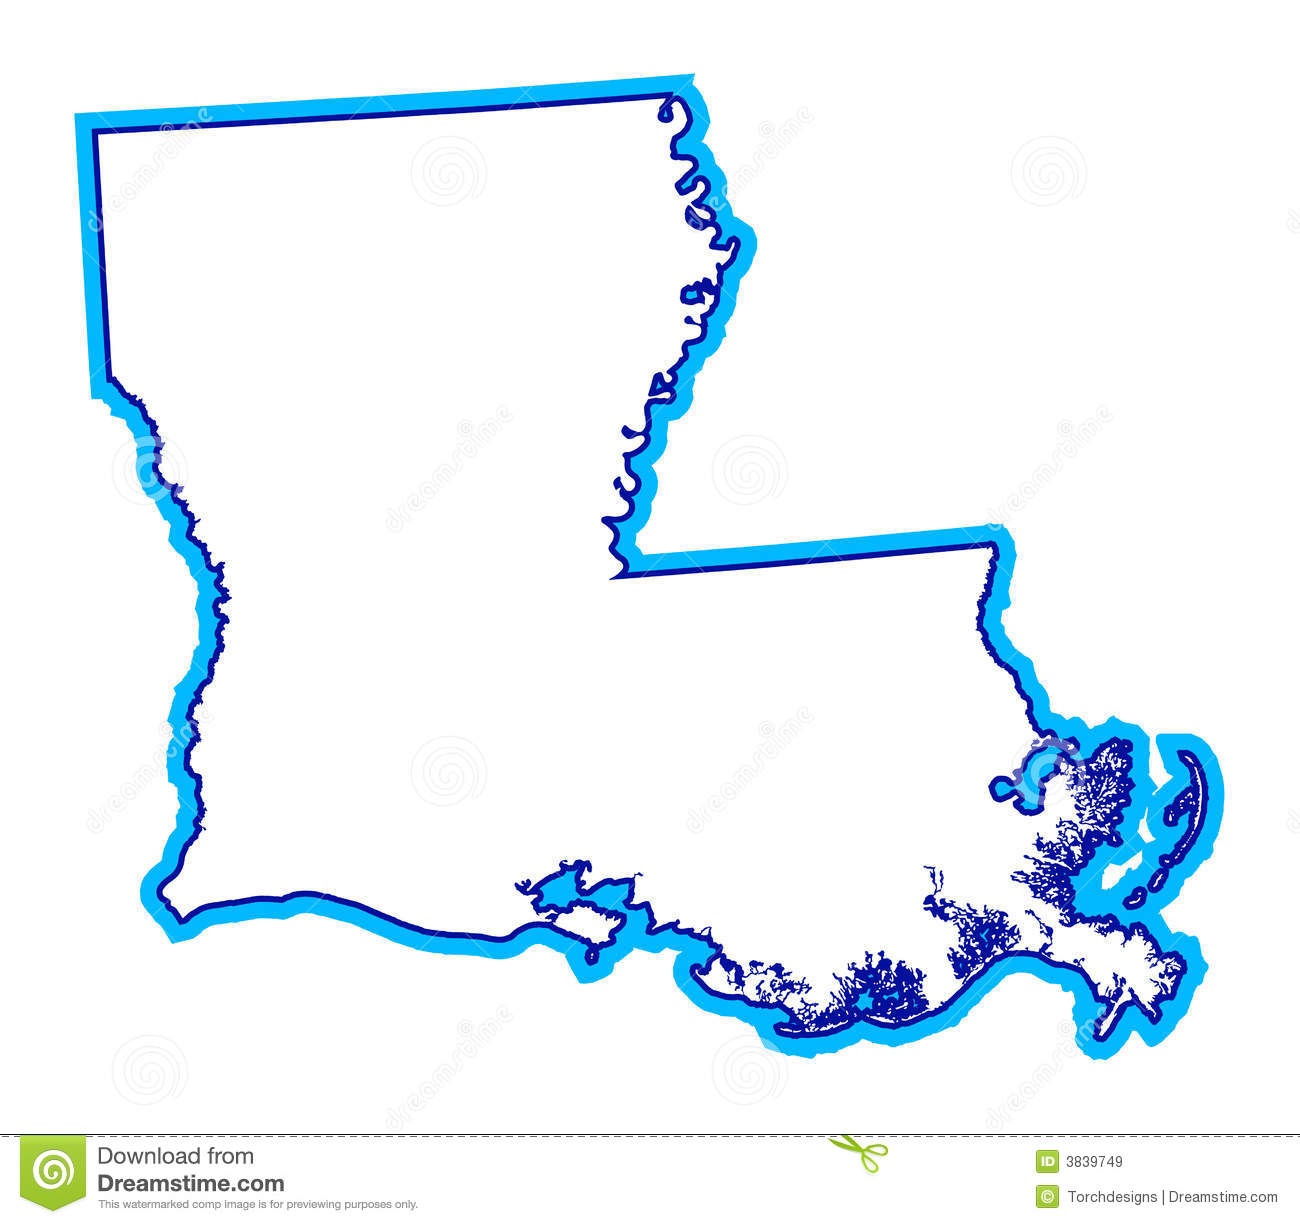 Outline Of State Of Louisiana Royalty Free Stock Images   Image